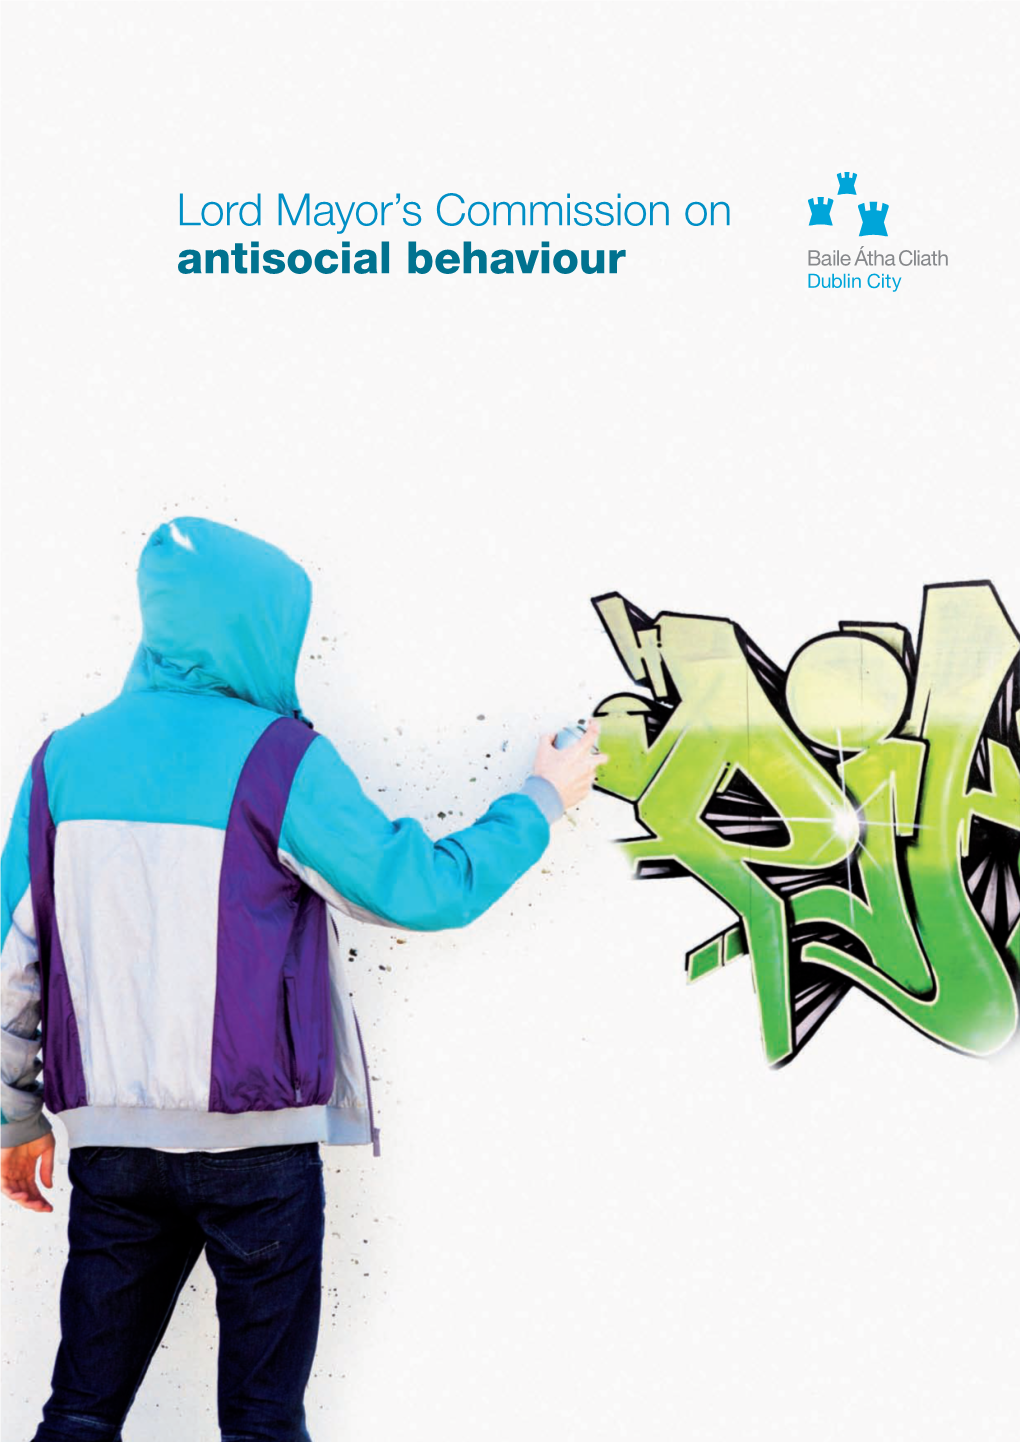 Lord Mayor's Commission on Antisocial Behaviour